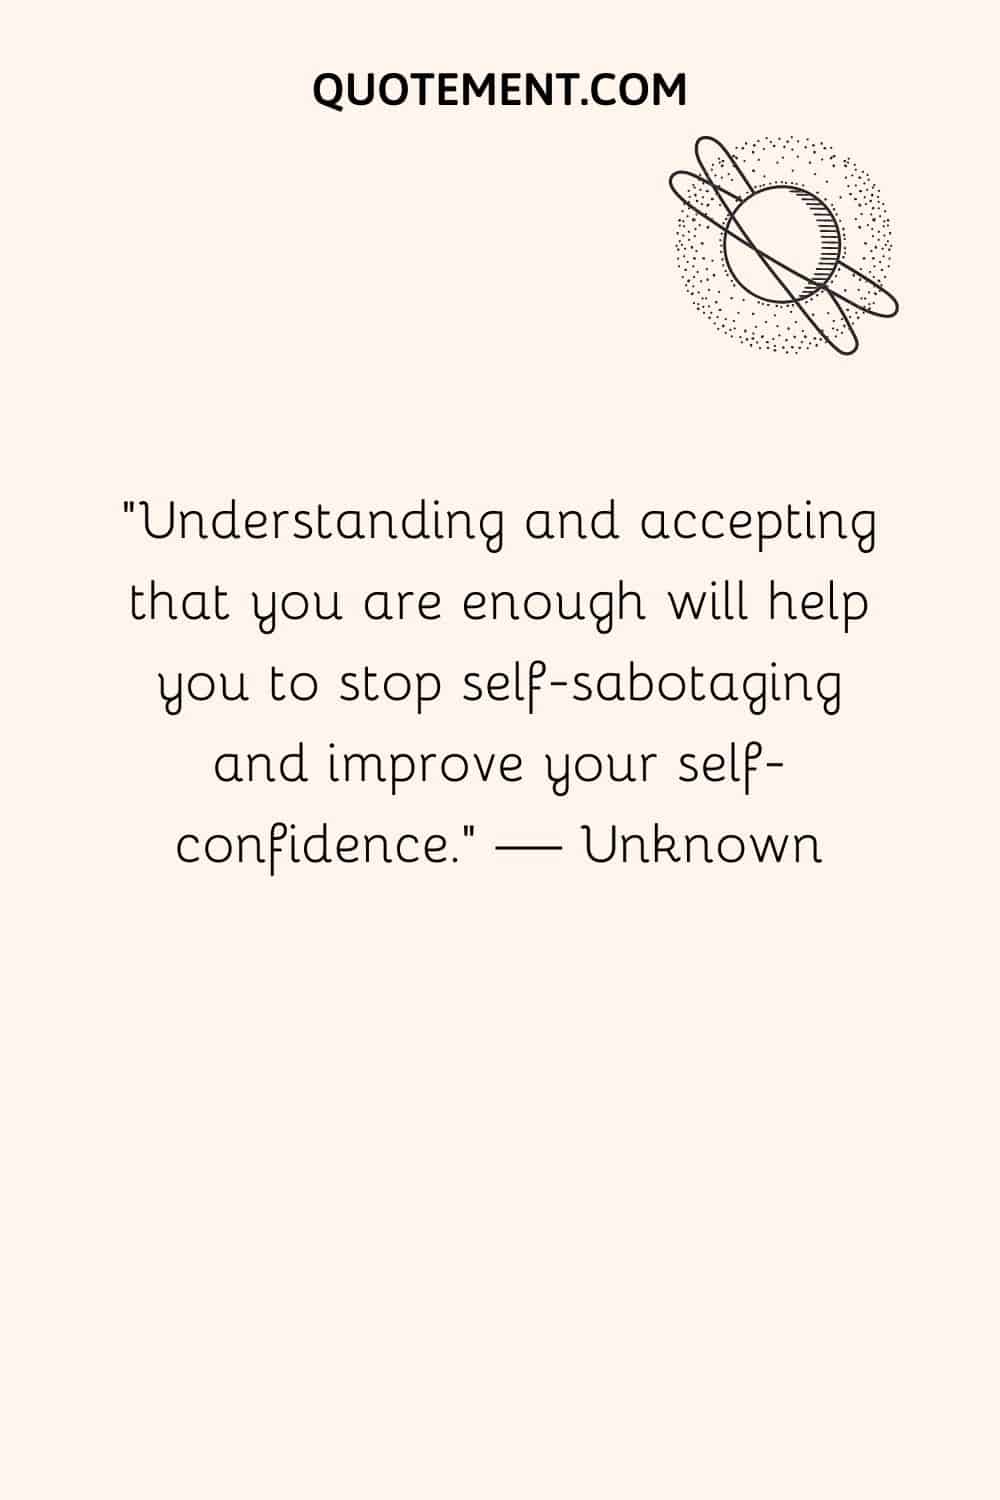 Understanding and accepting that you are enough will help you to stop self-sabotaging and improve your self-confidence